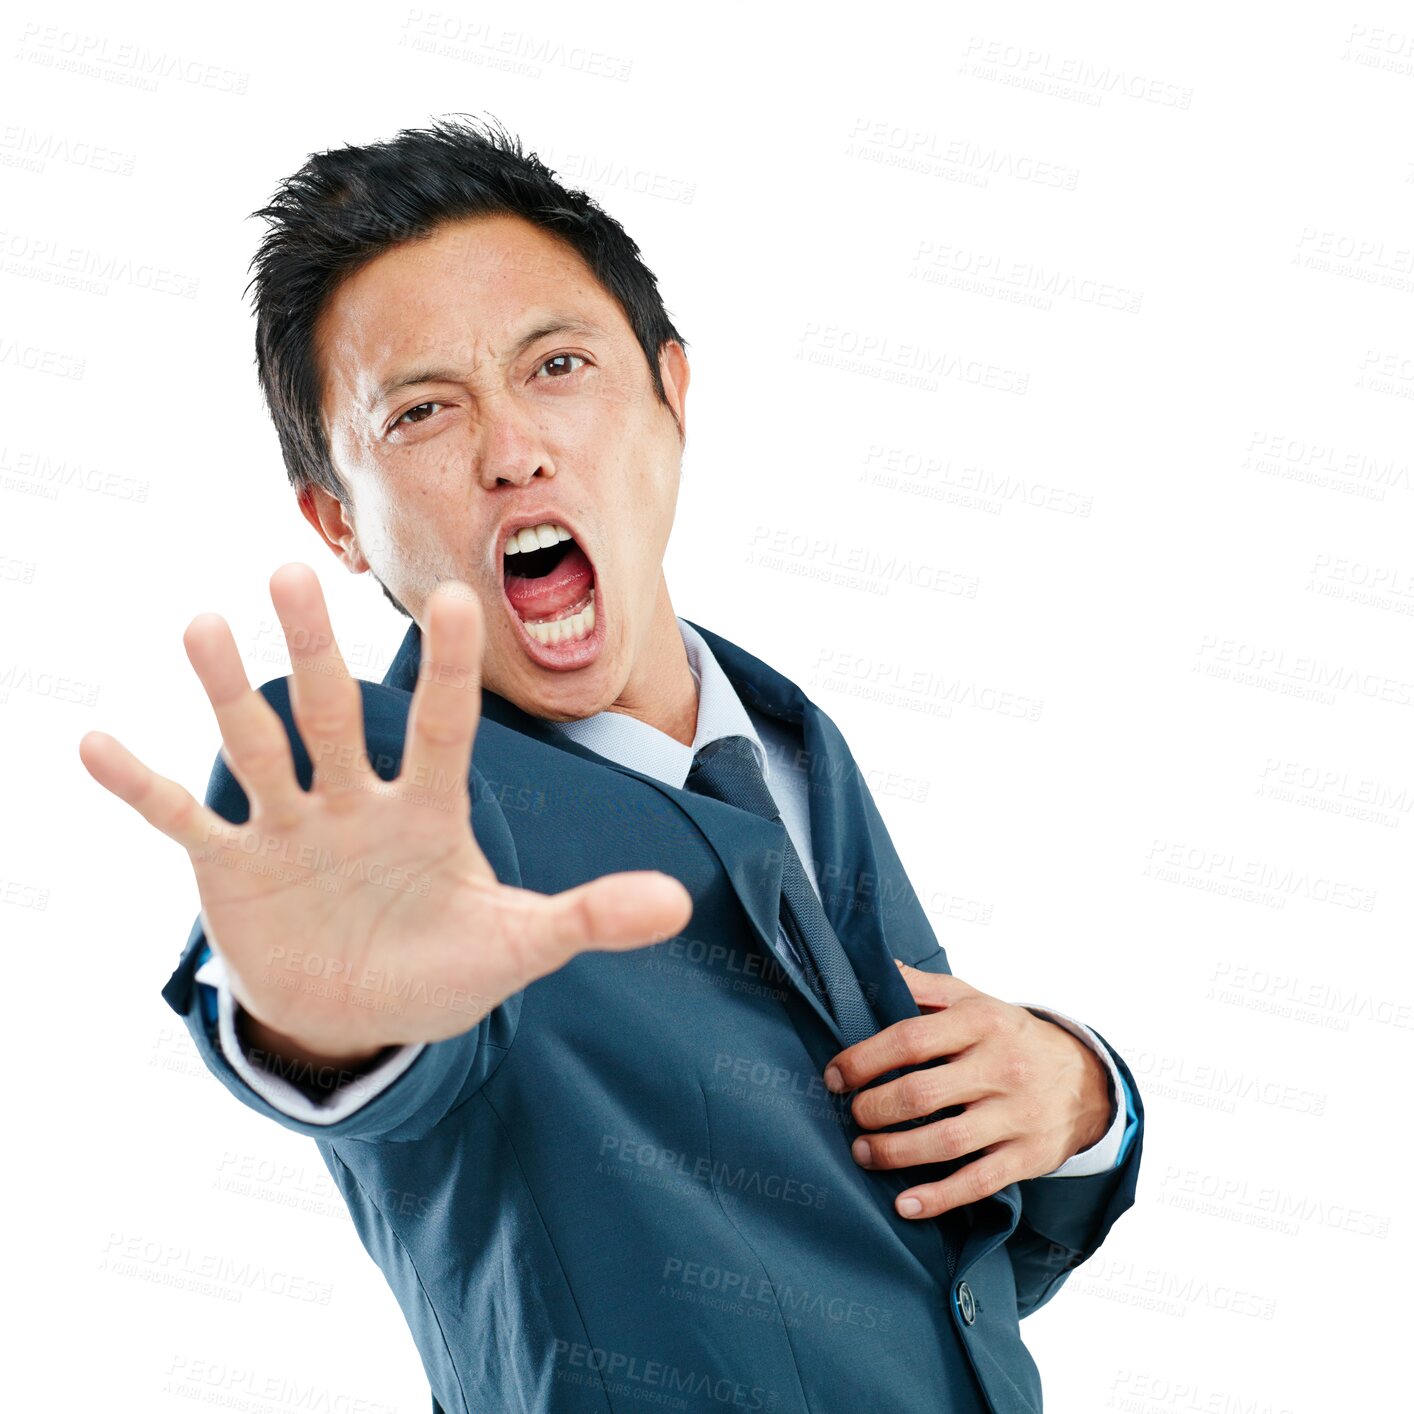 Buy stock photo Stop, portrait and PNG with a business man isolated on a transparent background to gesture a warning. Danger, screaming or shouting and a male asian employee yelling while blocking with aggression
